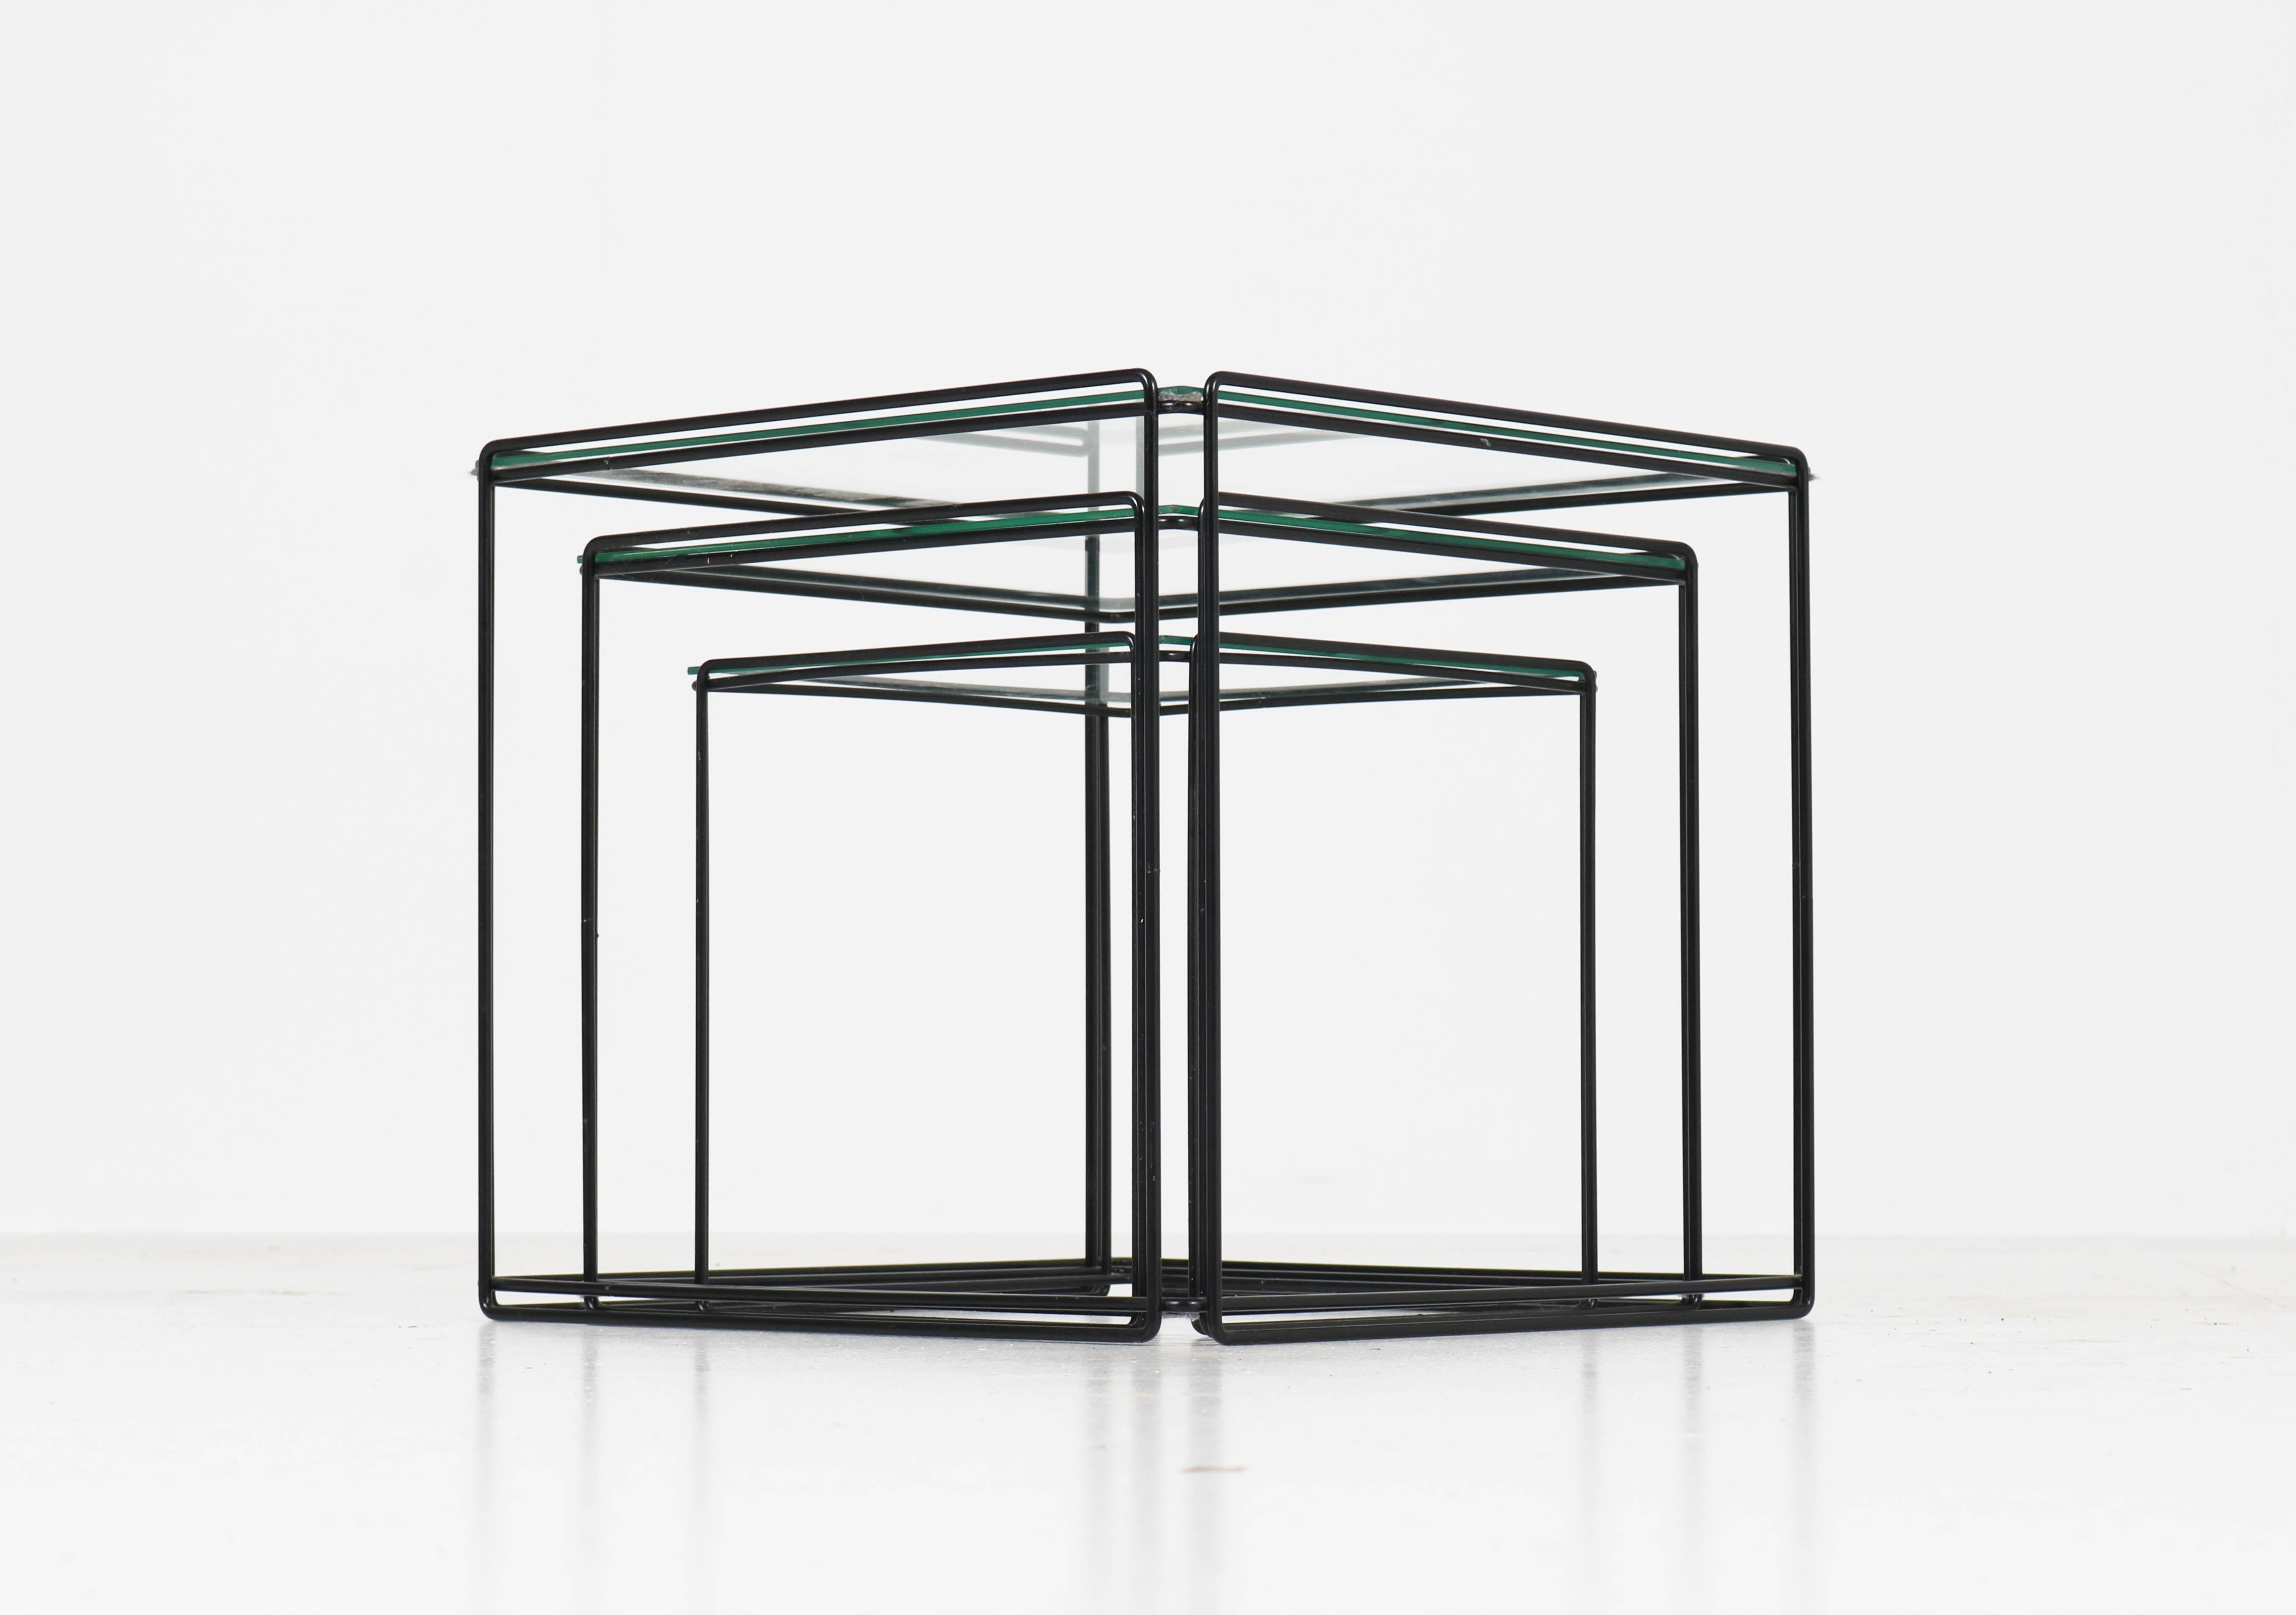 Wonderful set of three Mid-Century Modern nesting tables.
Design by Max Sauze.
Striking French design from the 1970s.
Black lacquered metal frames with glass tops.
In good original condition with minor wear consistent with age and